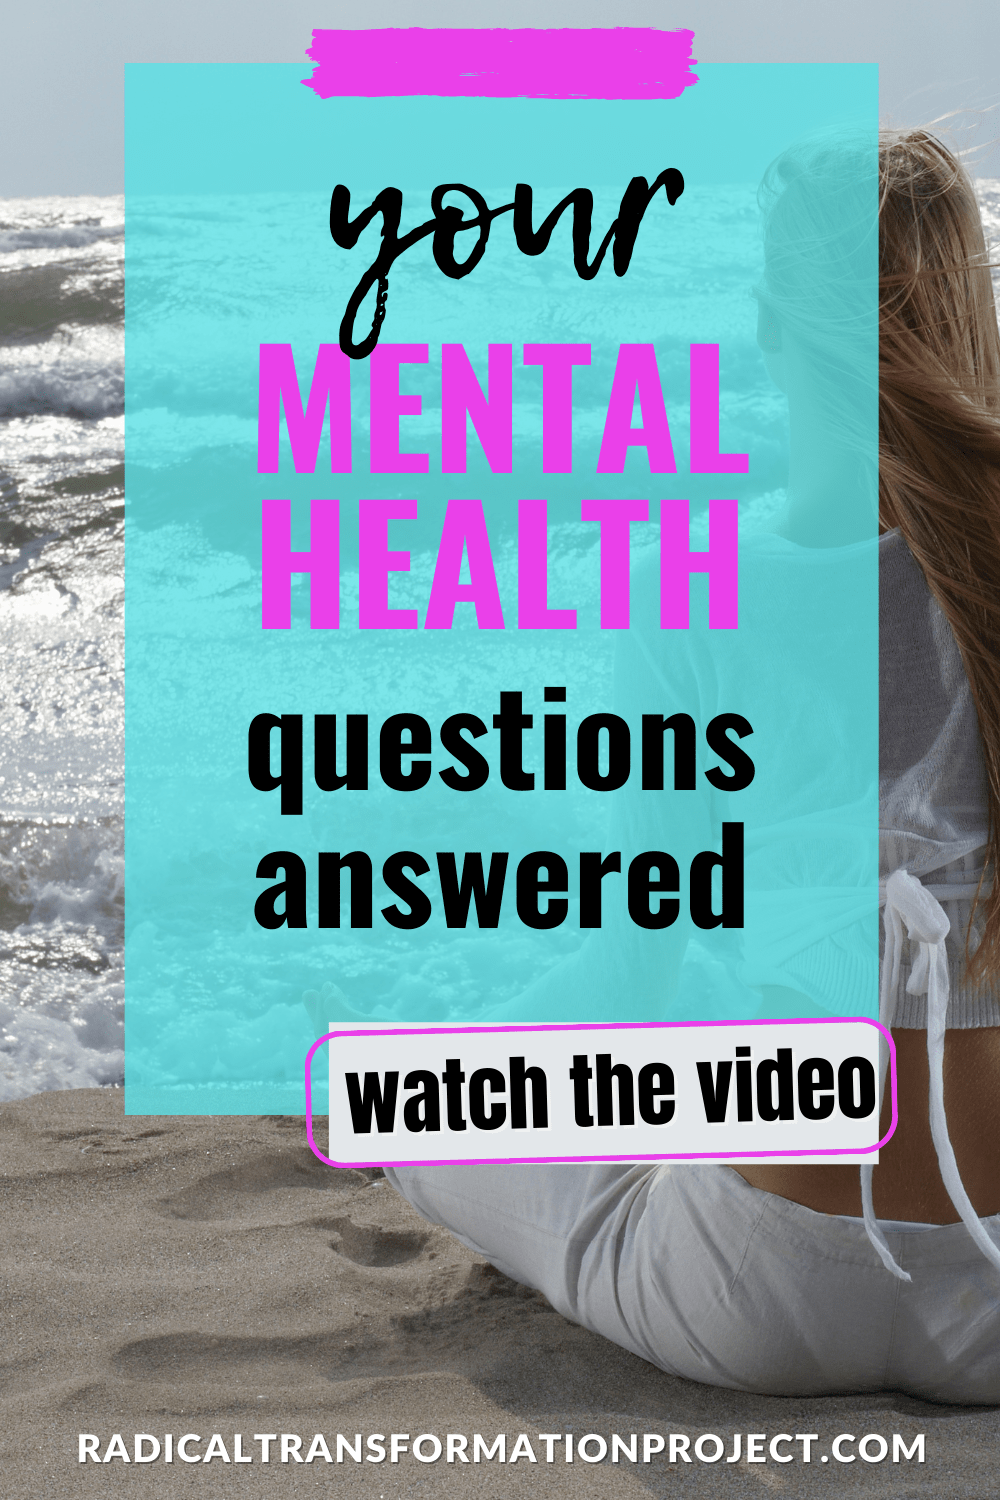 All your mental health questions answered!